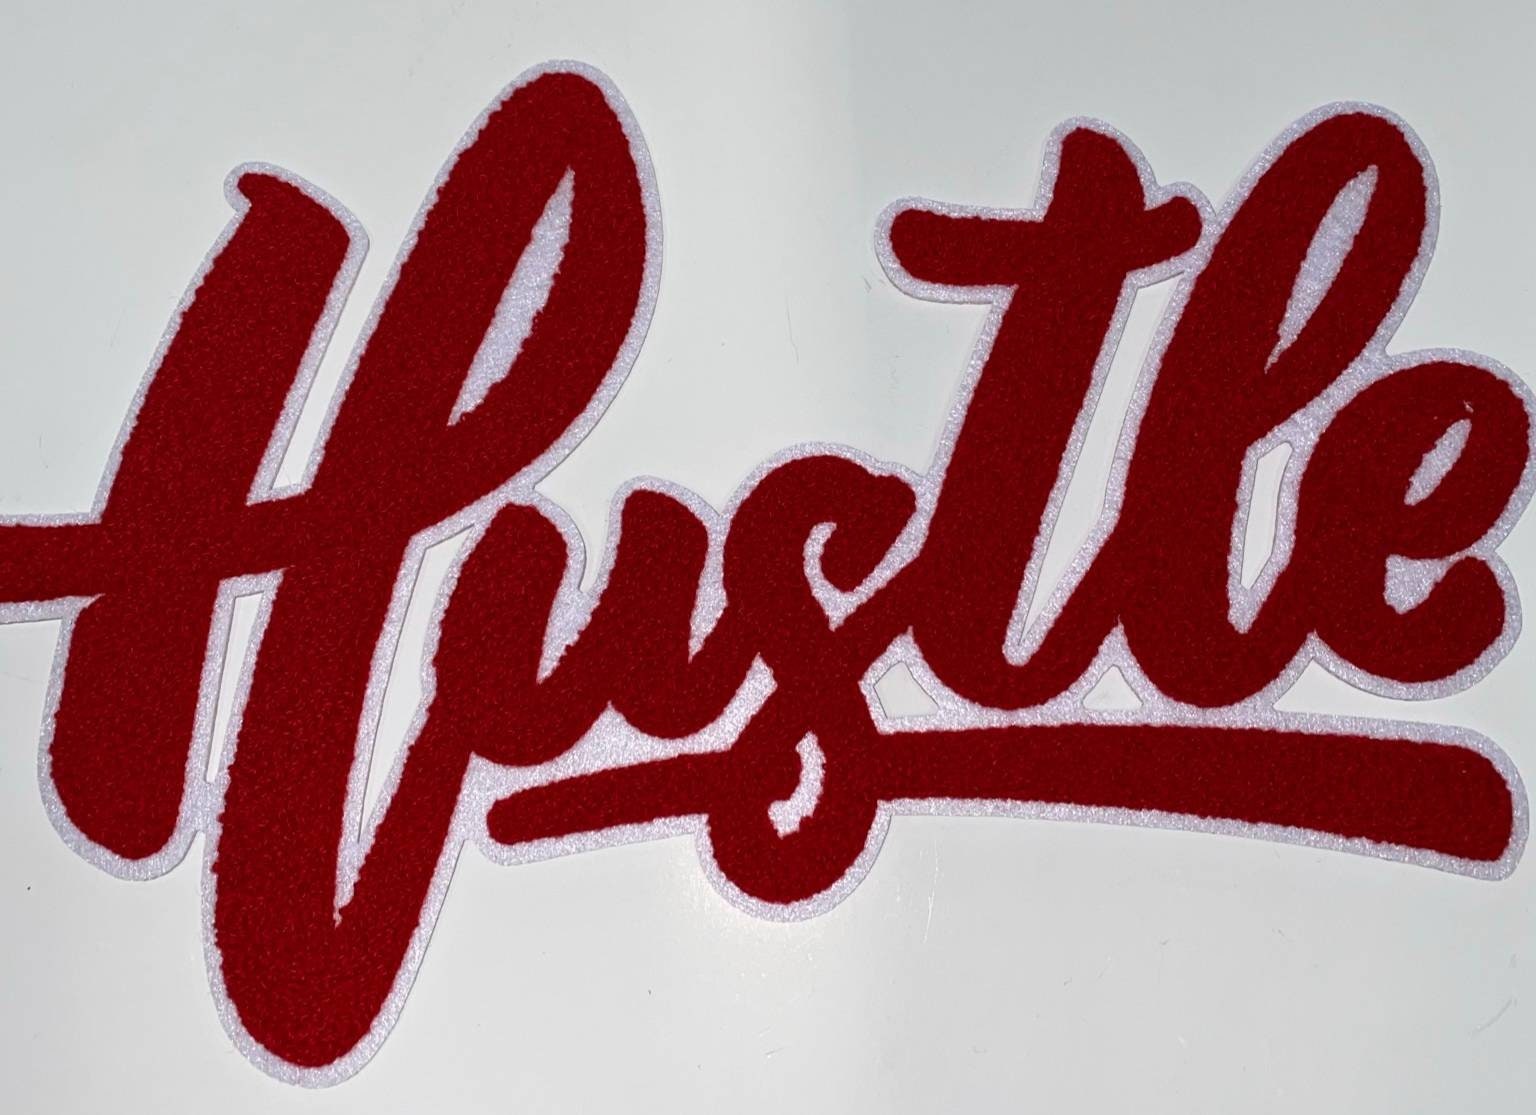 Exclusive, Red & White "Hustle" Chenille Patch (iron-on) Size 10"x8", Varsity Patch for Denim Jacket, Shirts and Hoodies, Large Patch